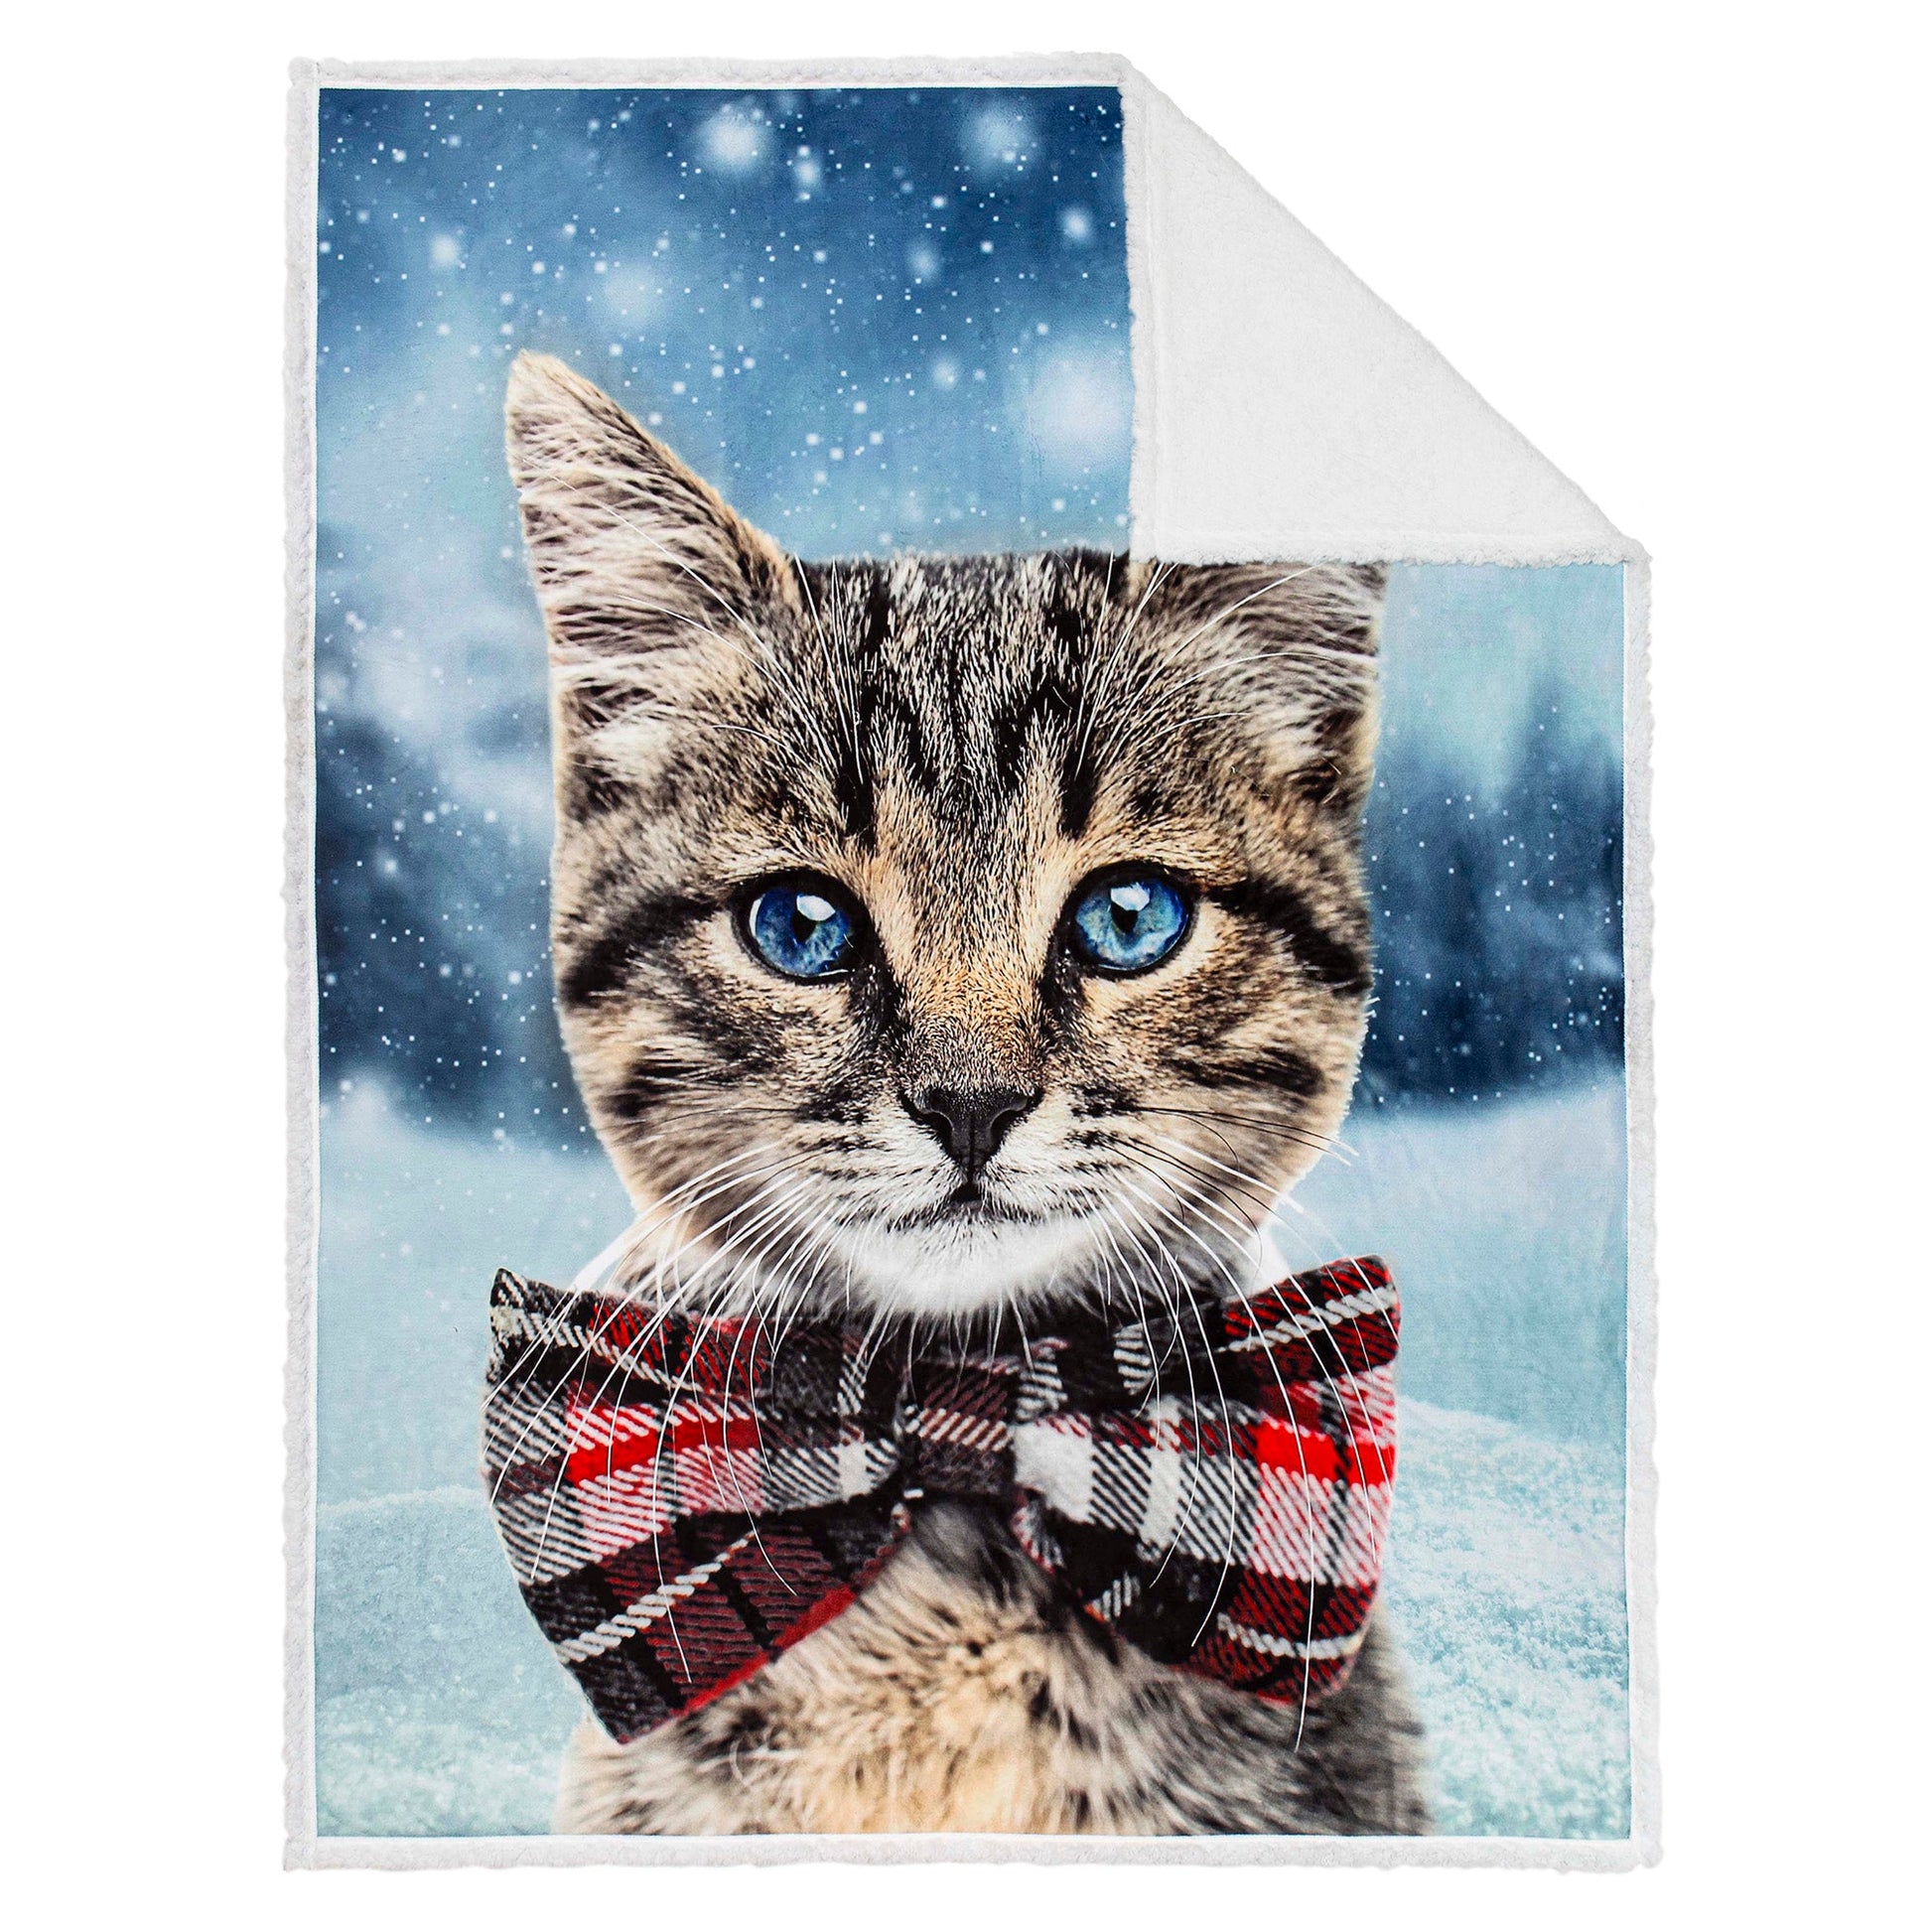 Super Soft Photoreal Reversible Blanket Throw Sherpa Home Decor Bedding 48X60 Bowtie Cat - DecoElegance - Blanket Throw Home Bedding